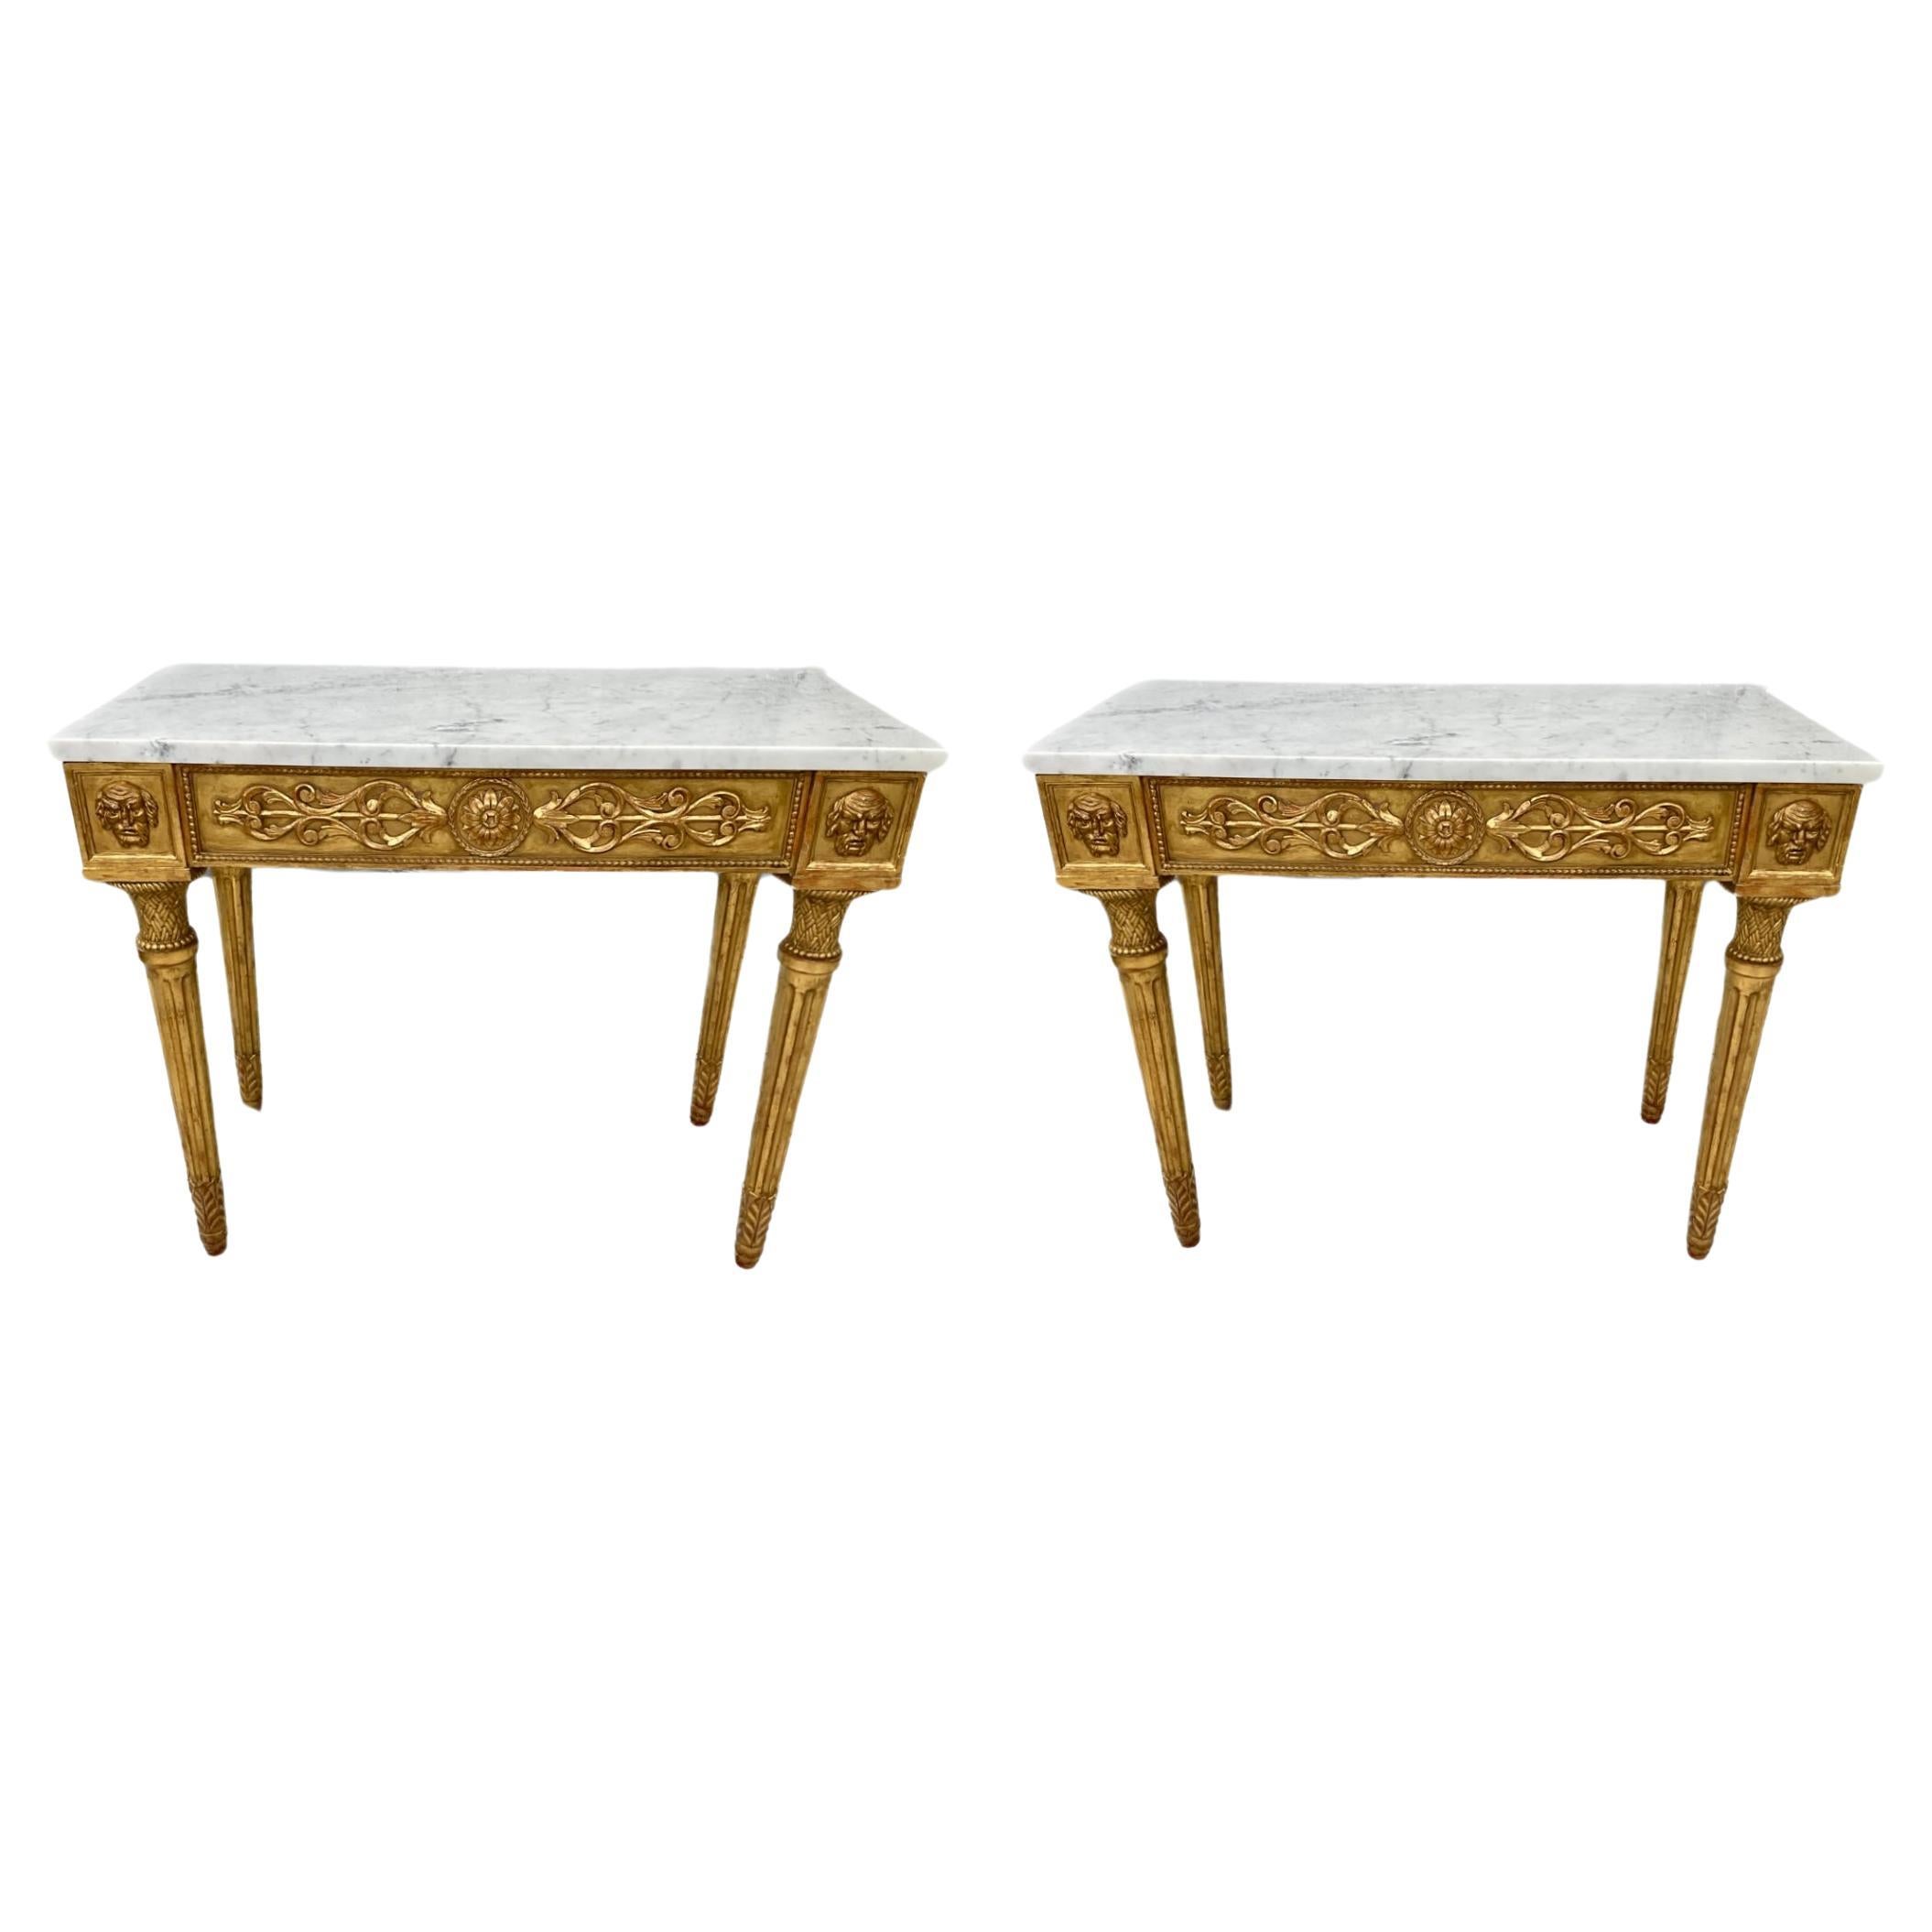 Pair Of 19th Century Italian Neoclassical Giltwood Console table With Marble Top